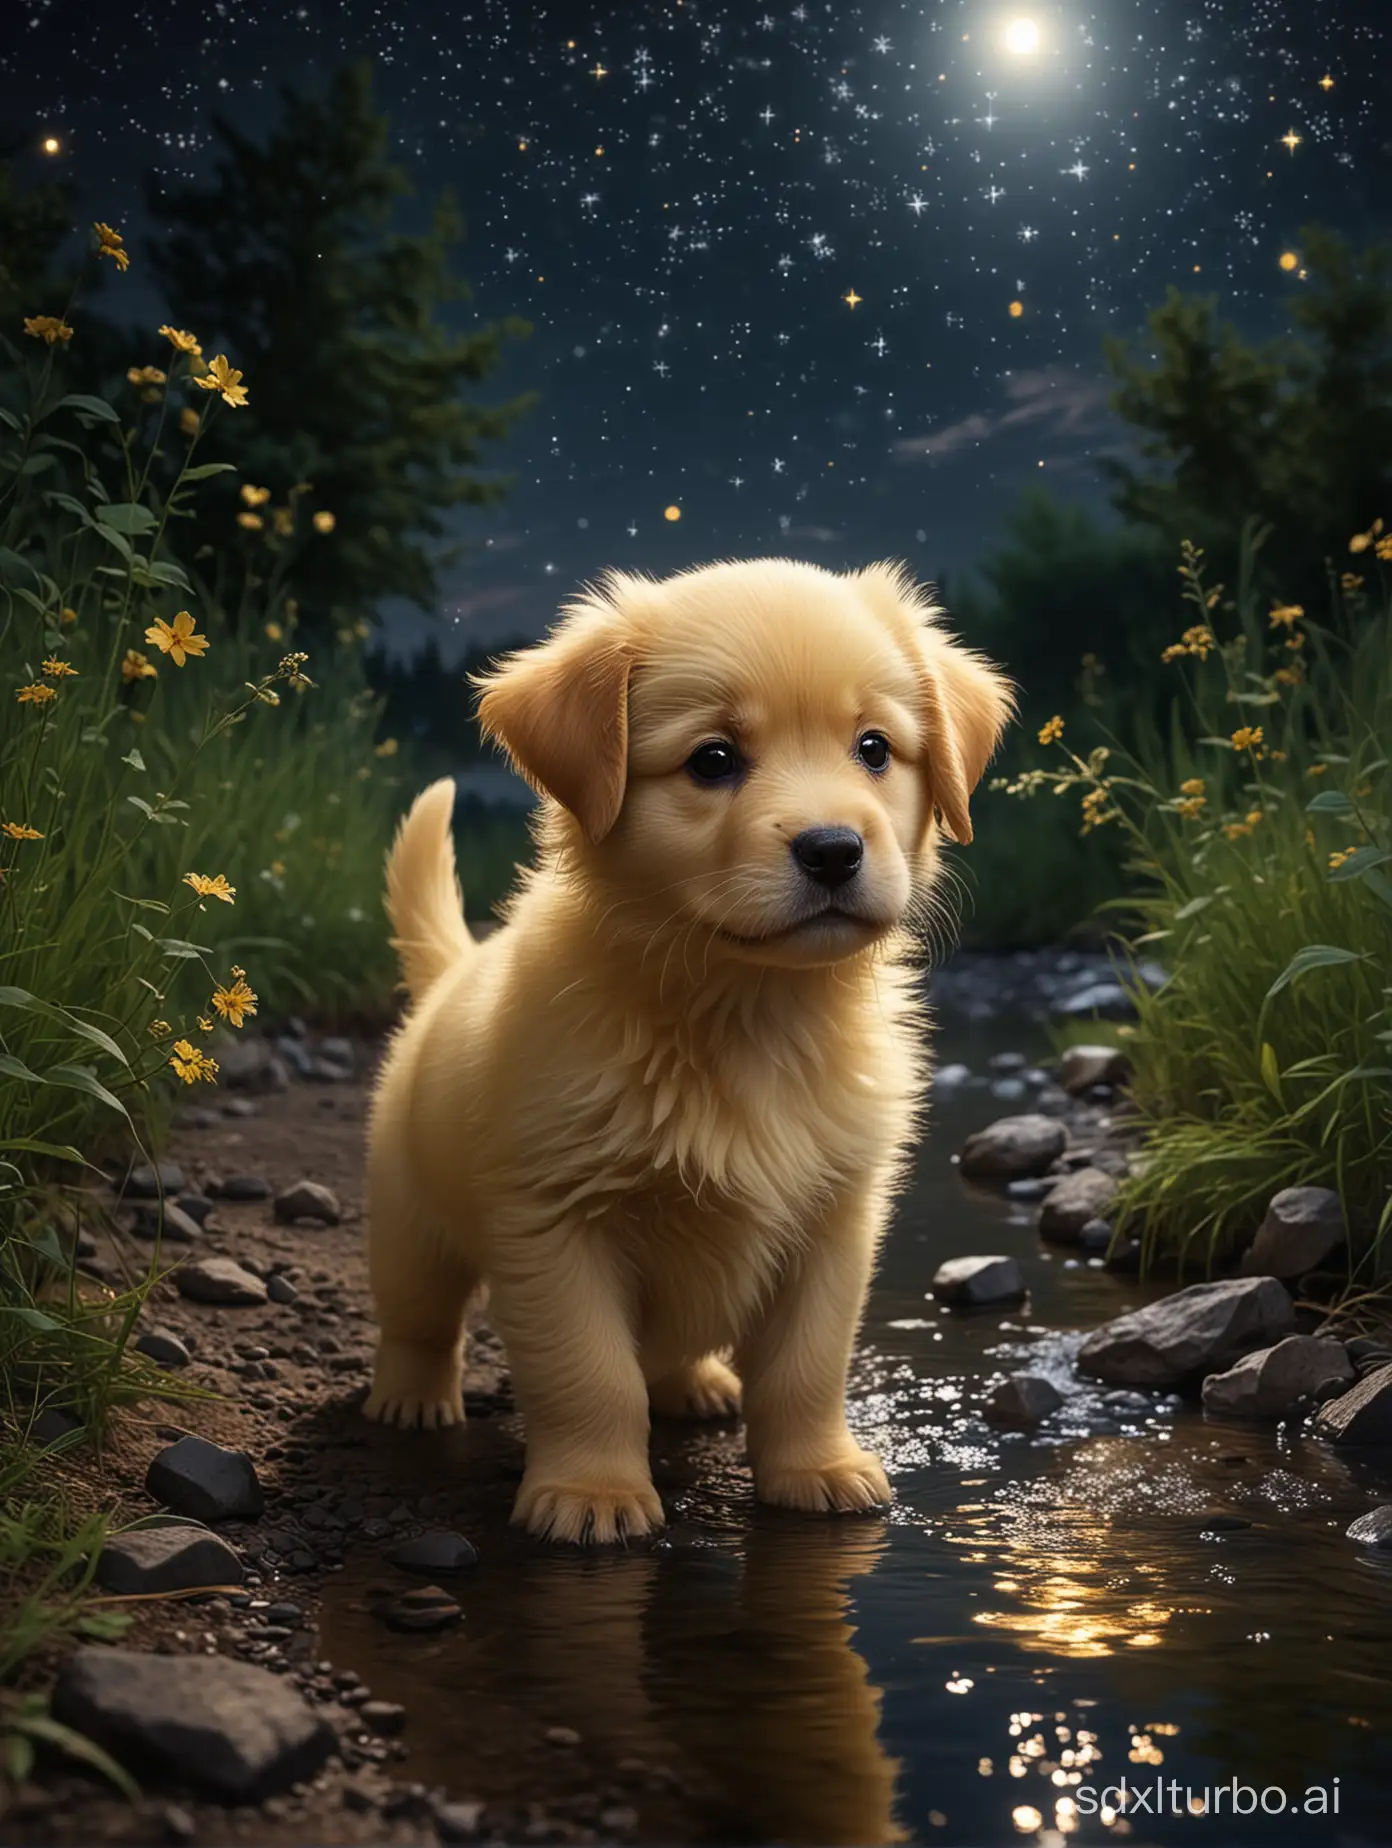 The fluffy yellow puppy, by the small river in the night, the stars shining brightly